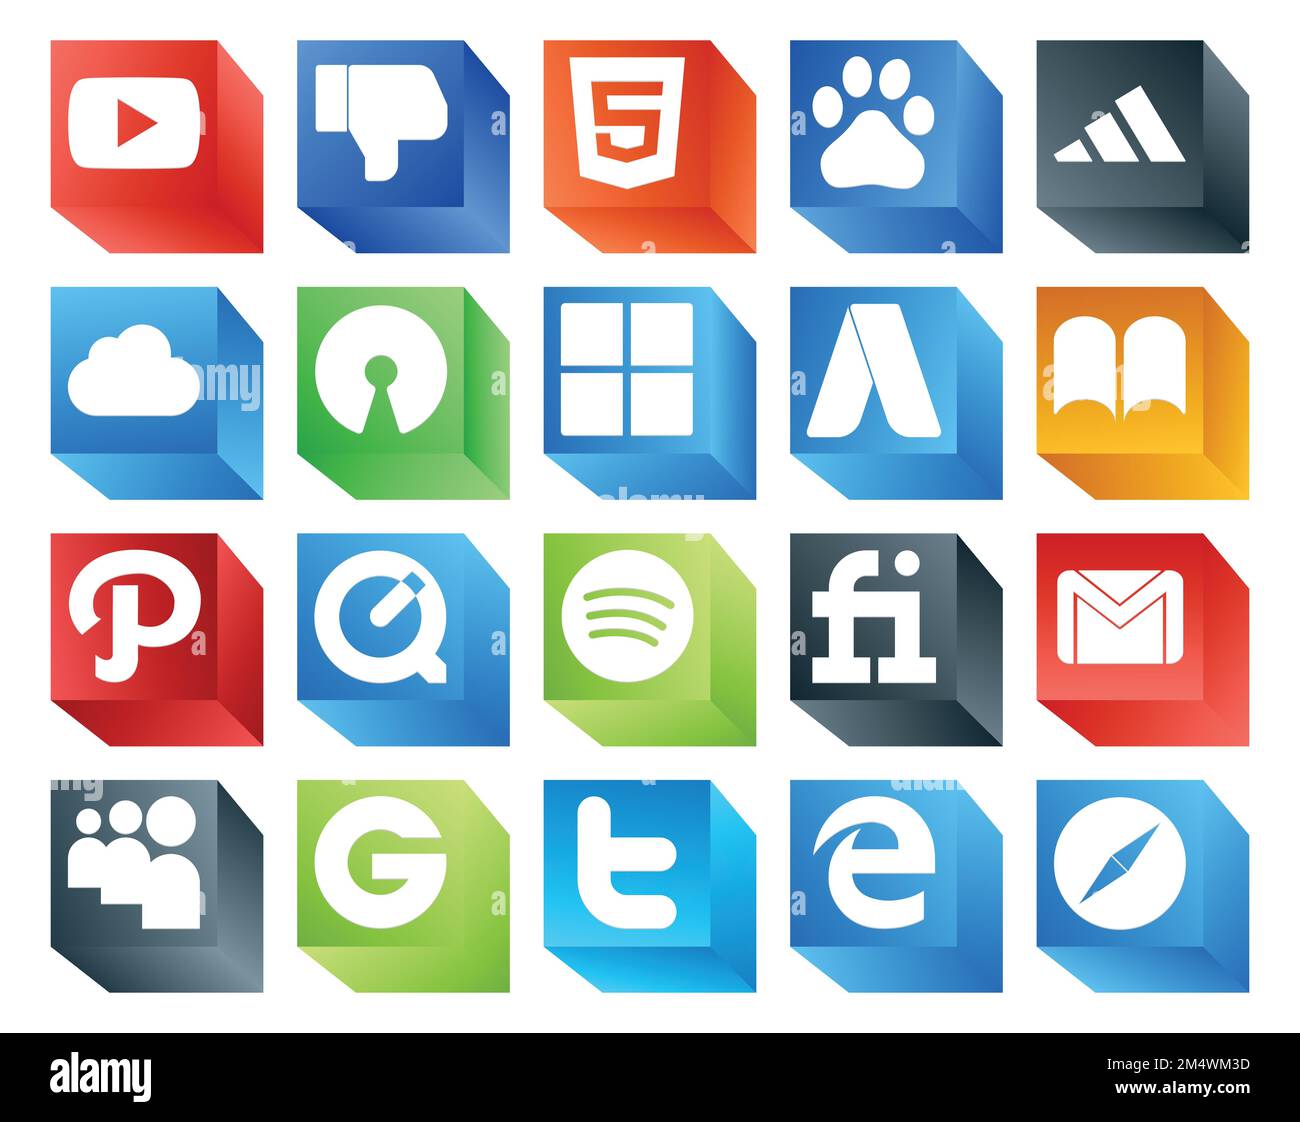 20 Social Media Icon Pack Including mail. gmail. microsoft. fiverr. quicktime Stock Vector